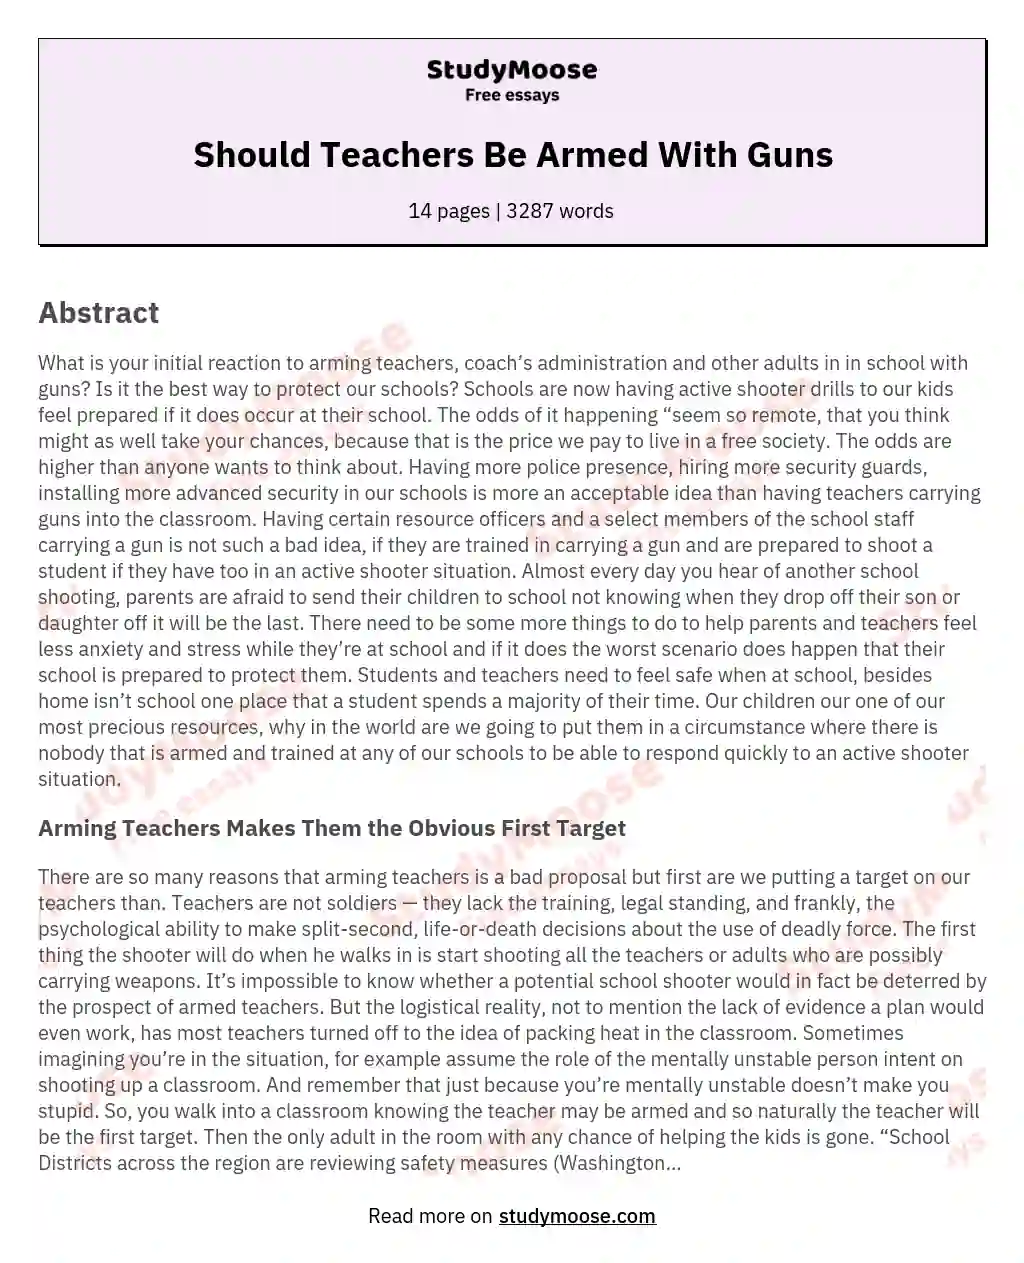 Should Teachers Be Armed With Guns essay